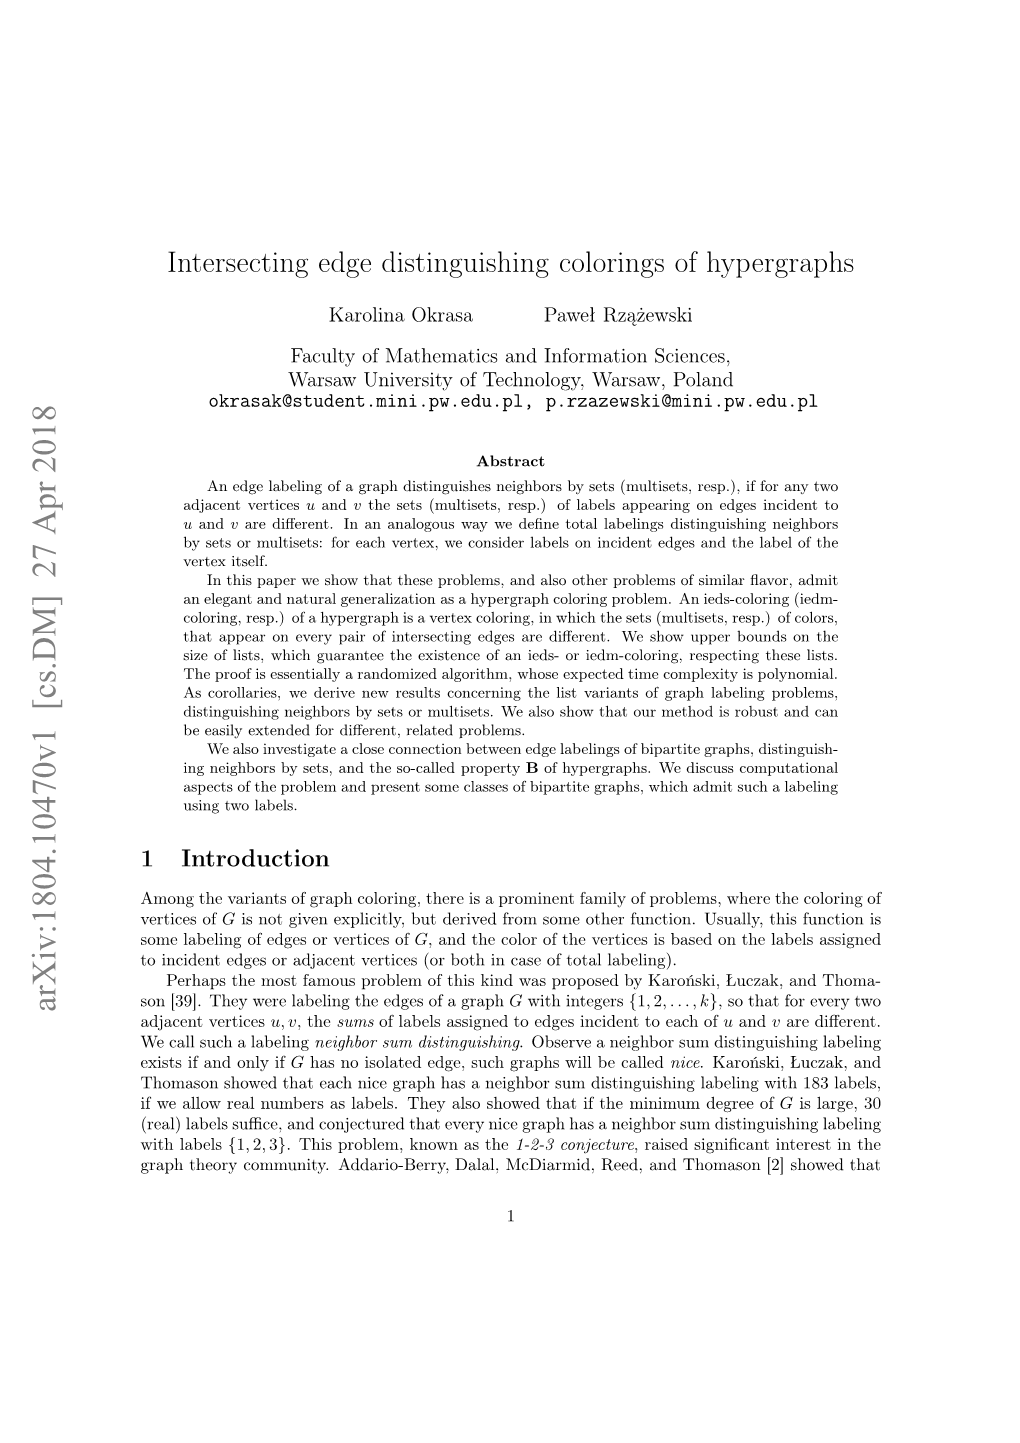 Intersecting Edge Distinguishing Colorings of Hypergraphs